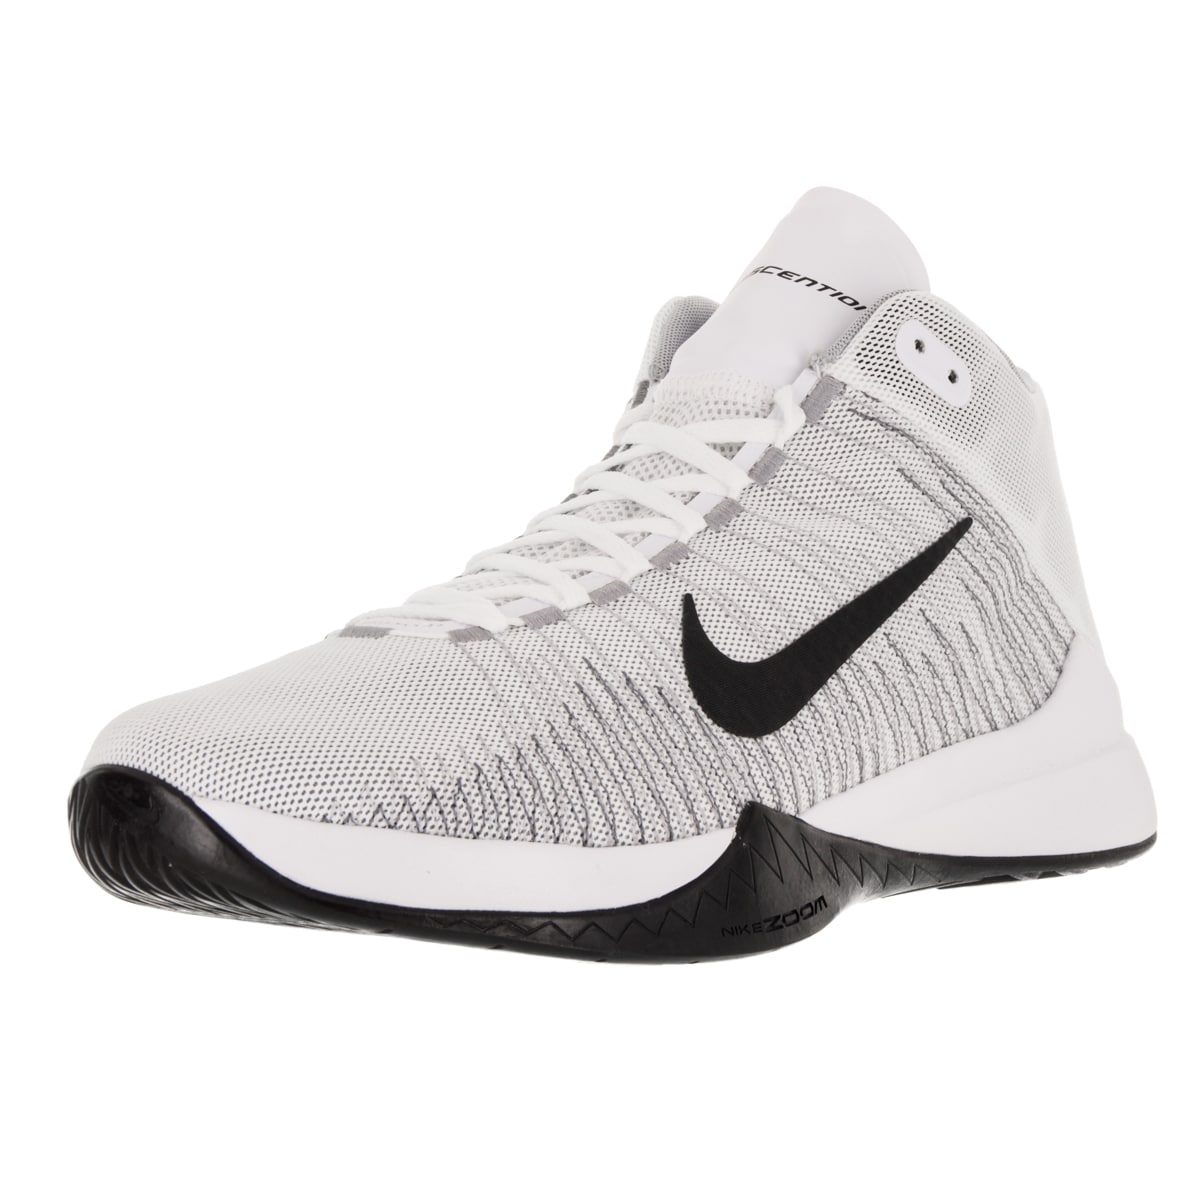 nike zoom ascention price